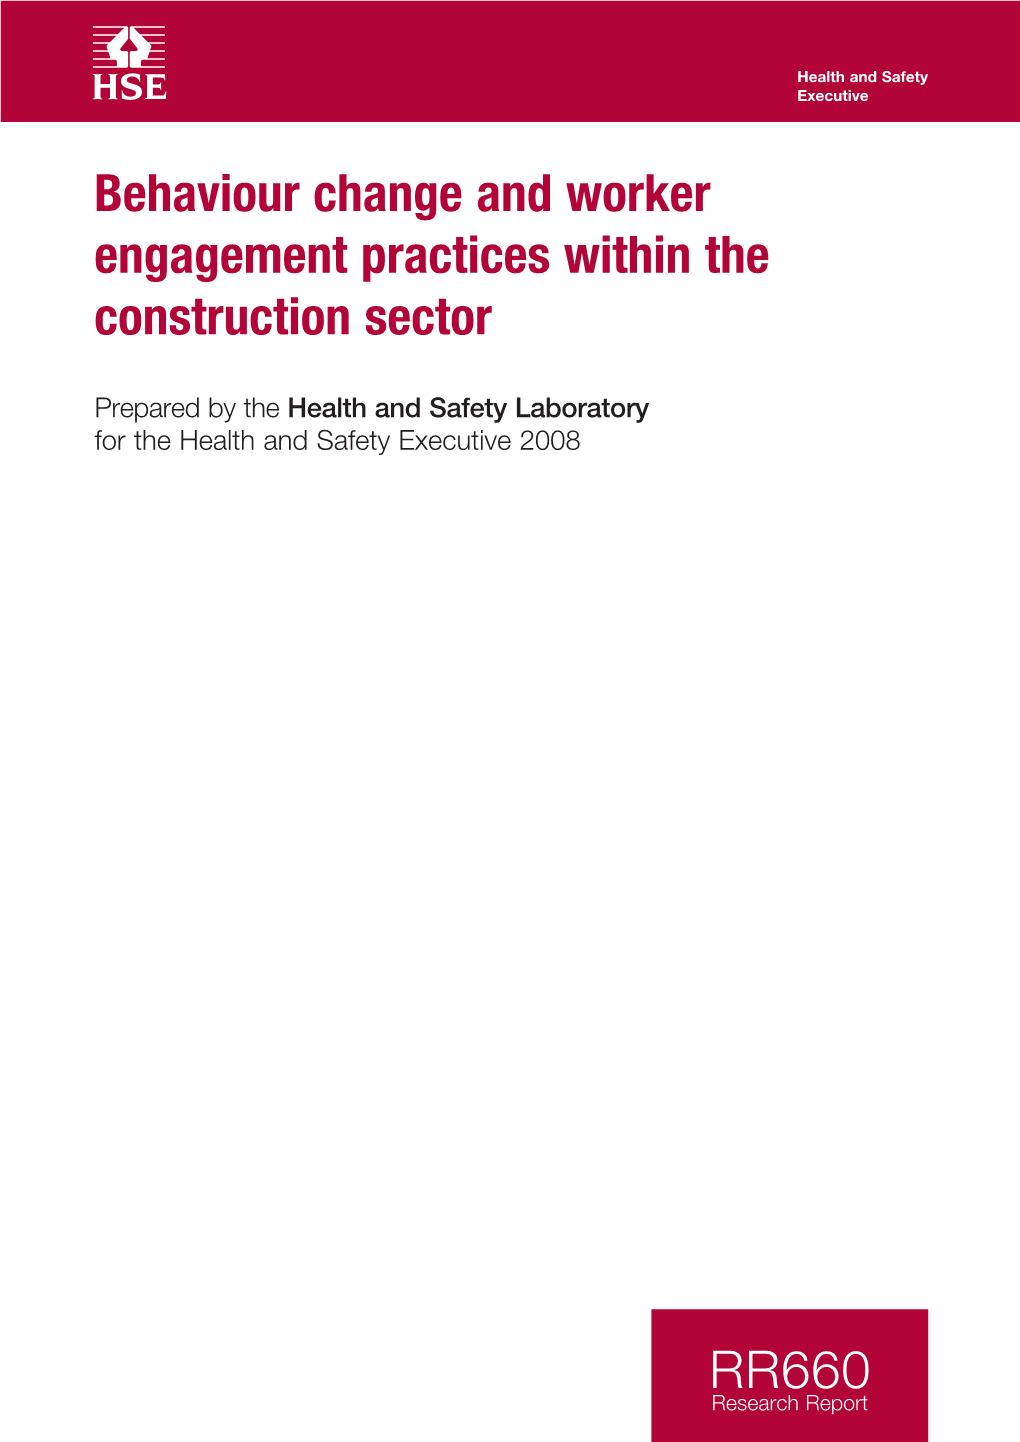 RR660: Behaviour Change and Worker Engagement Practices Within The